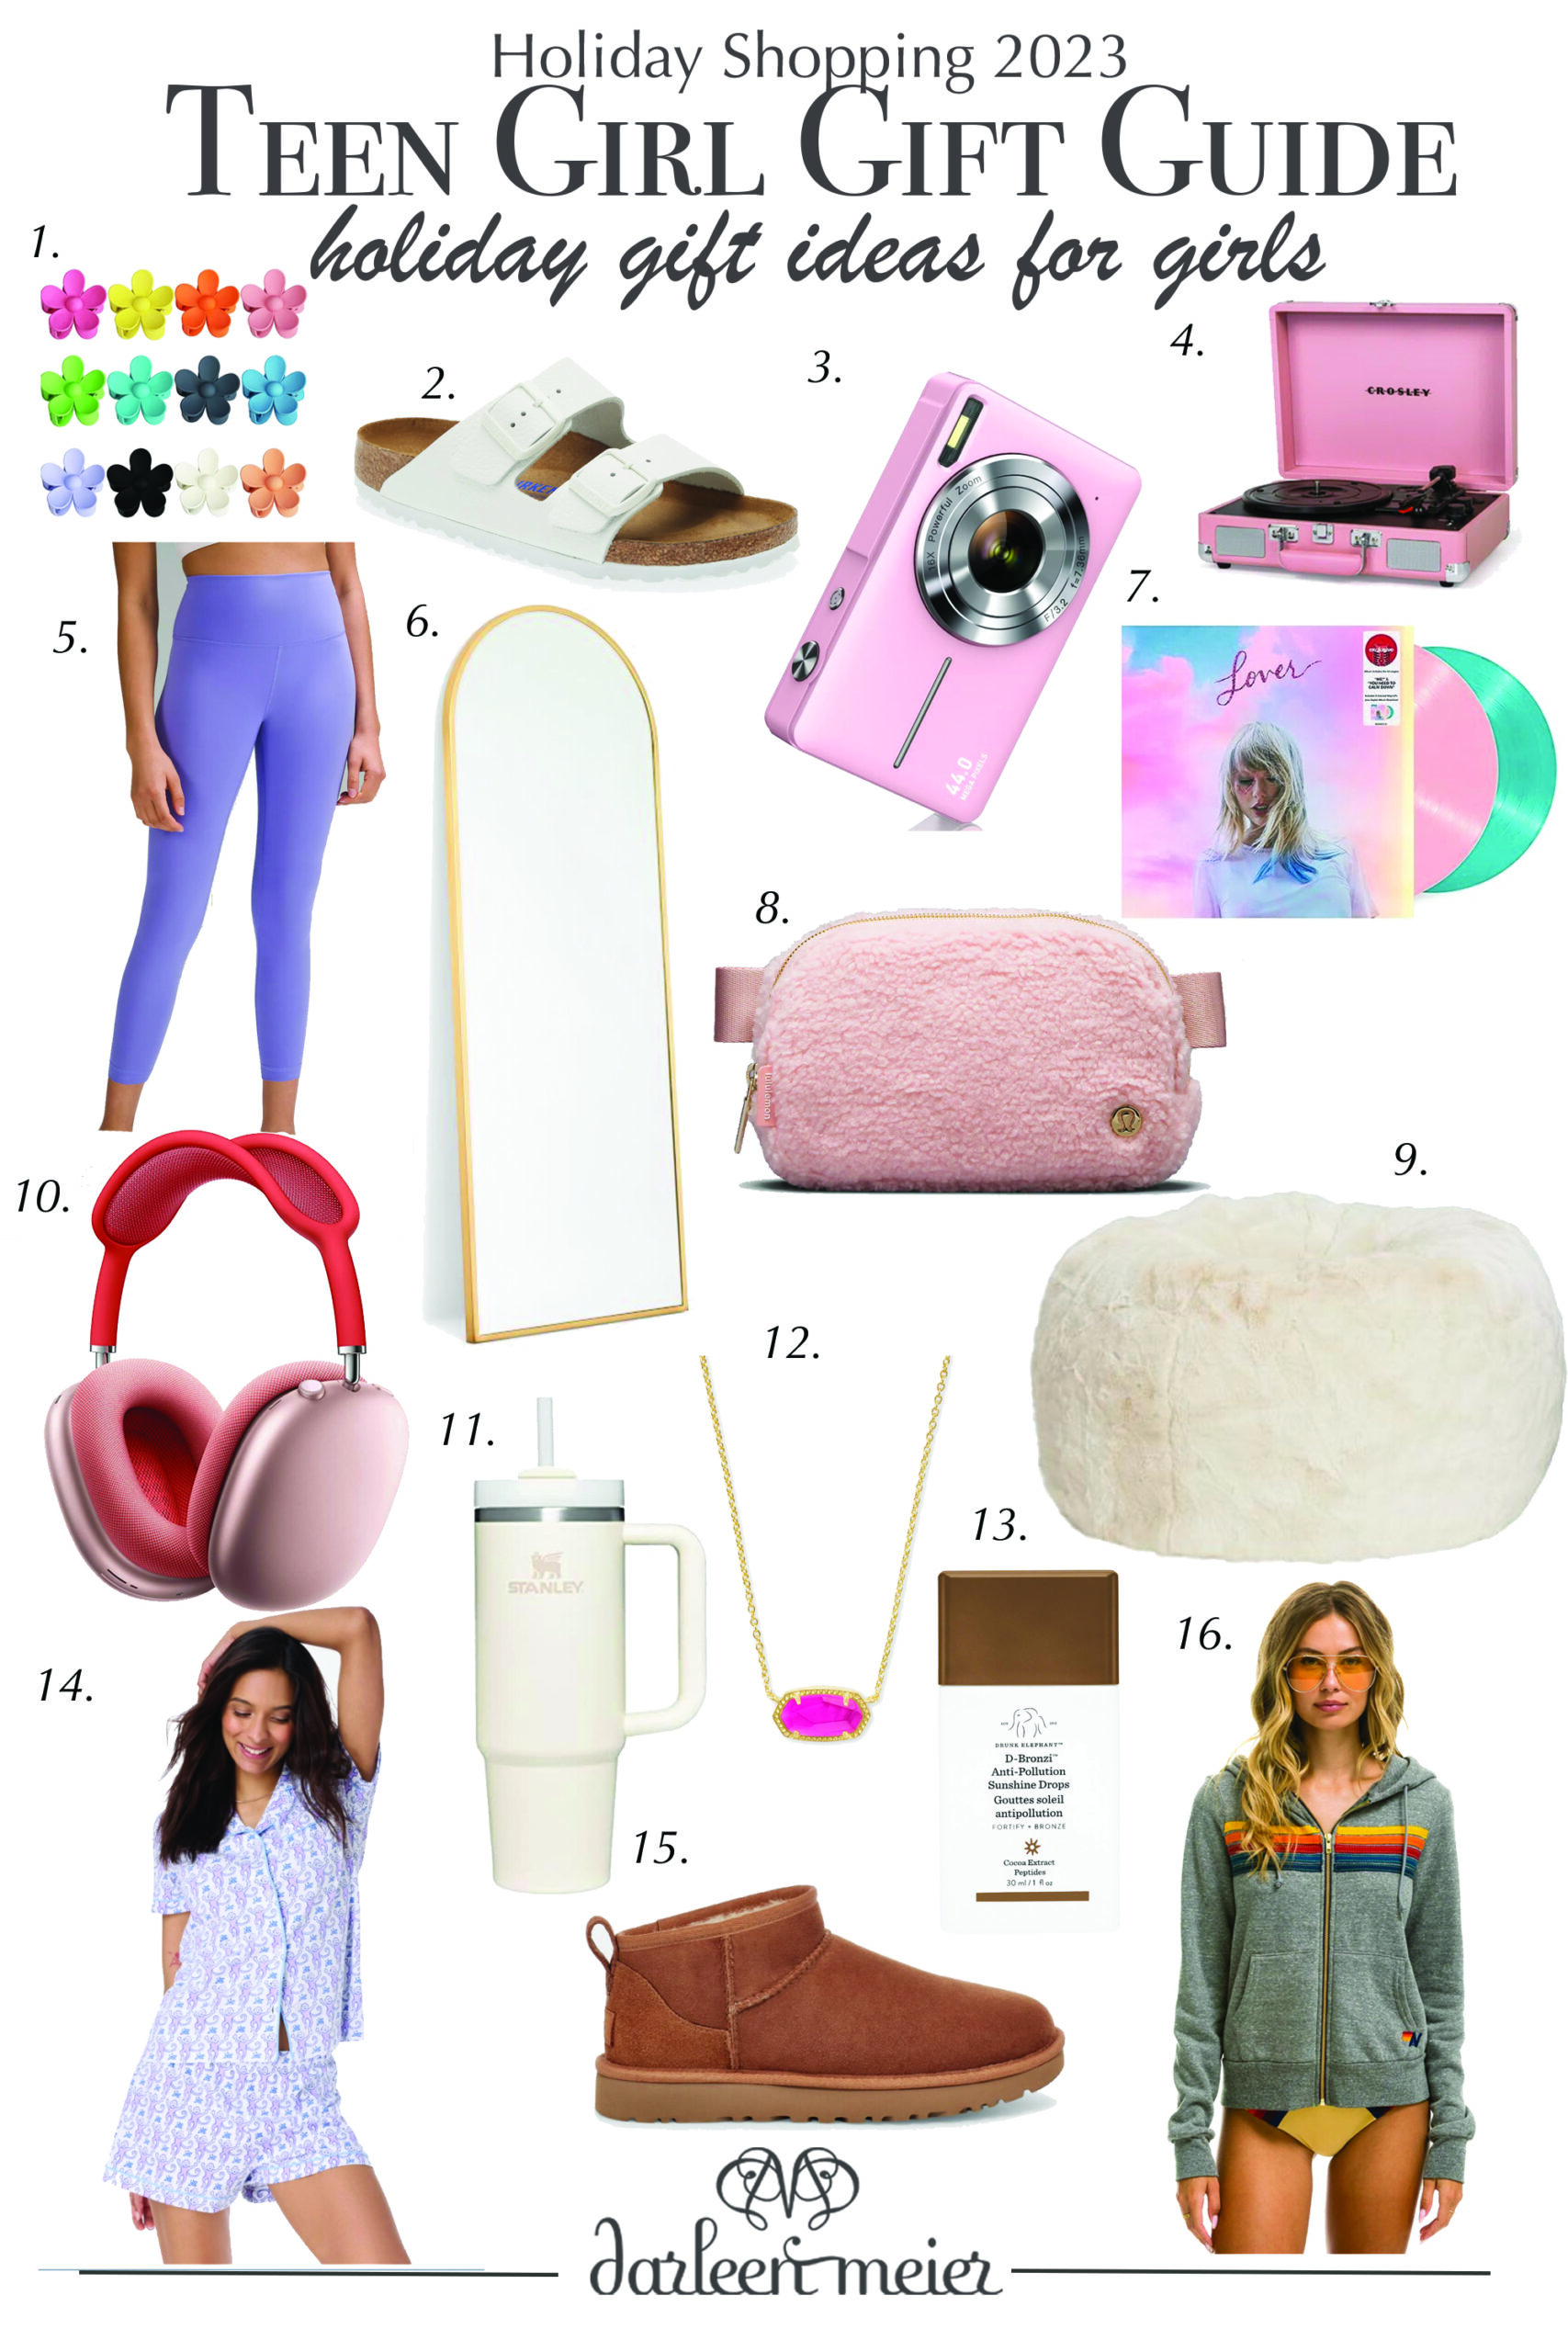 Gift Ideas for Teen Girls - Search Shopping